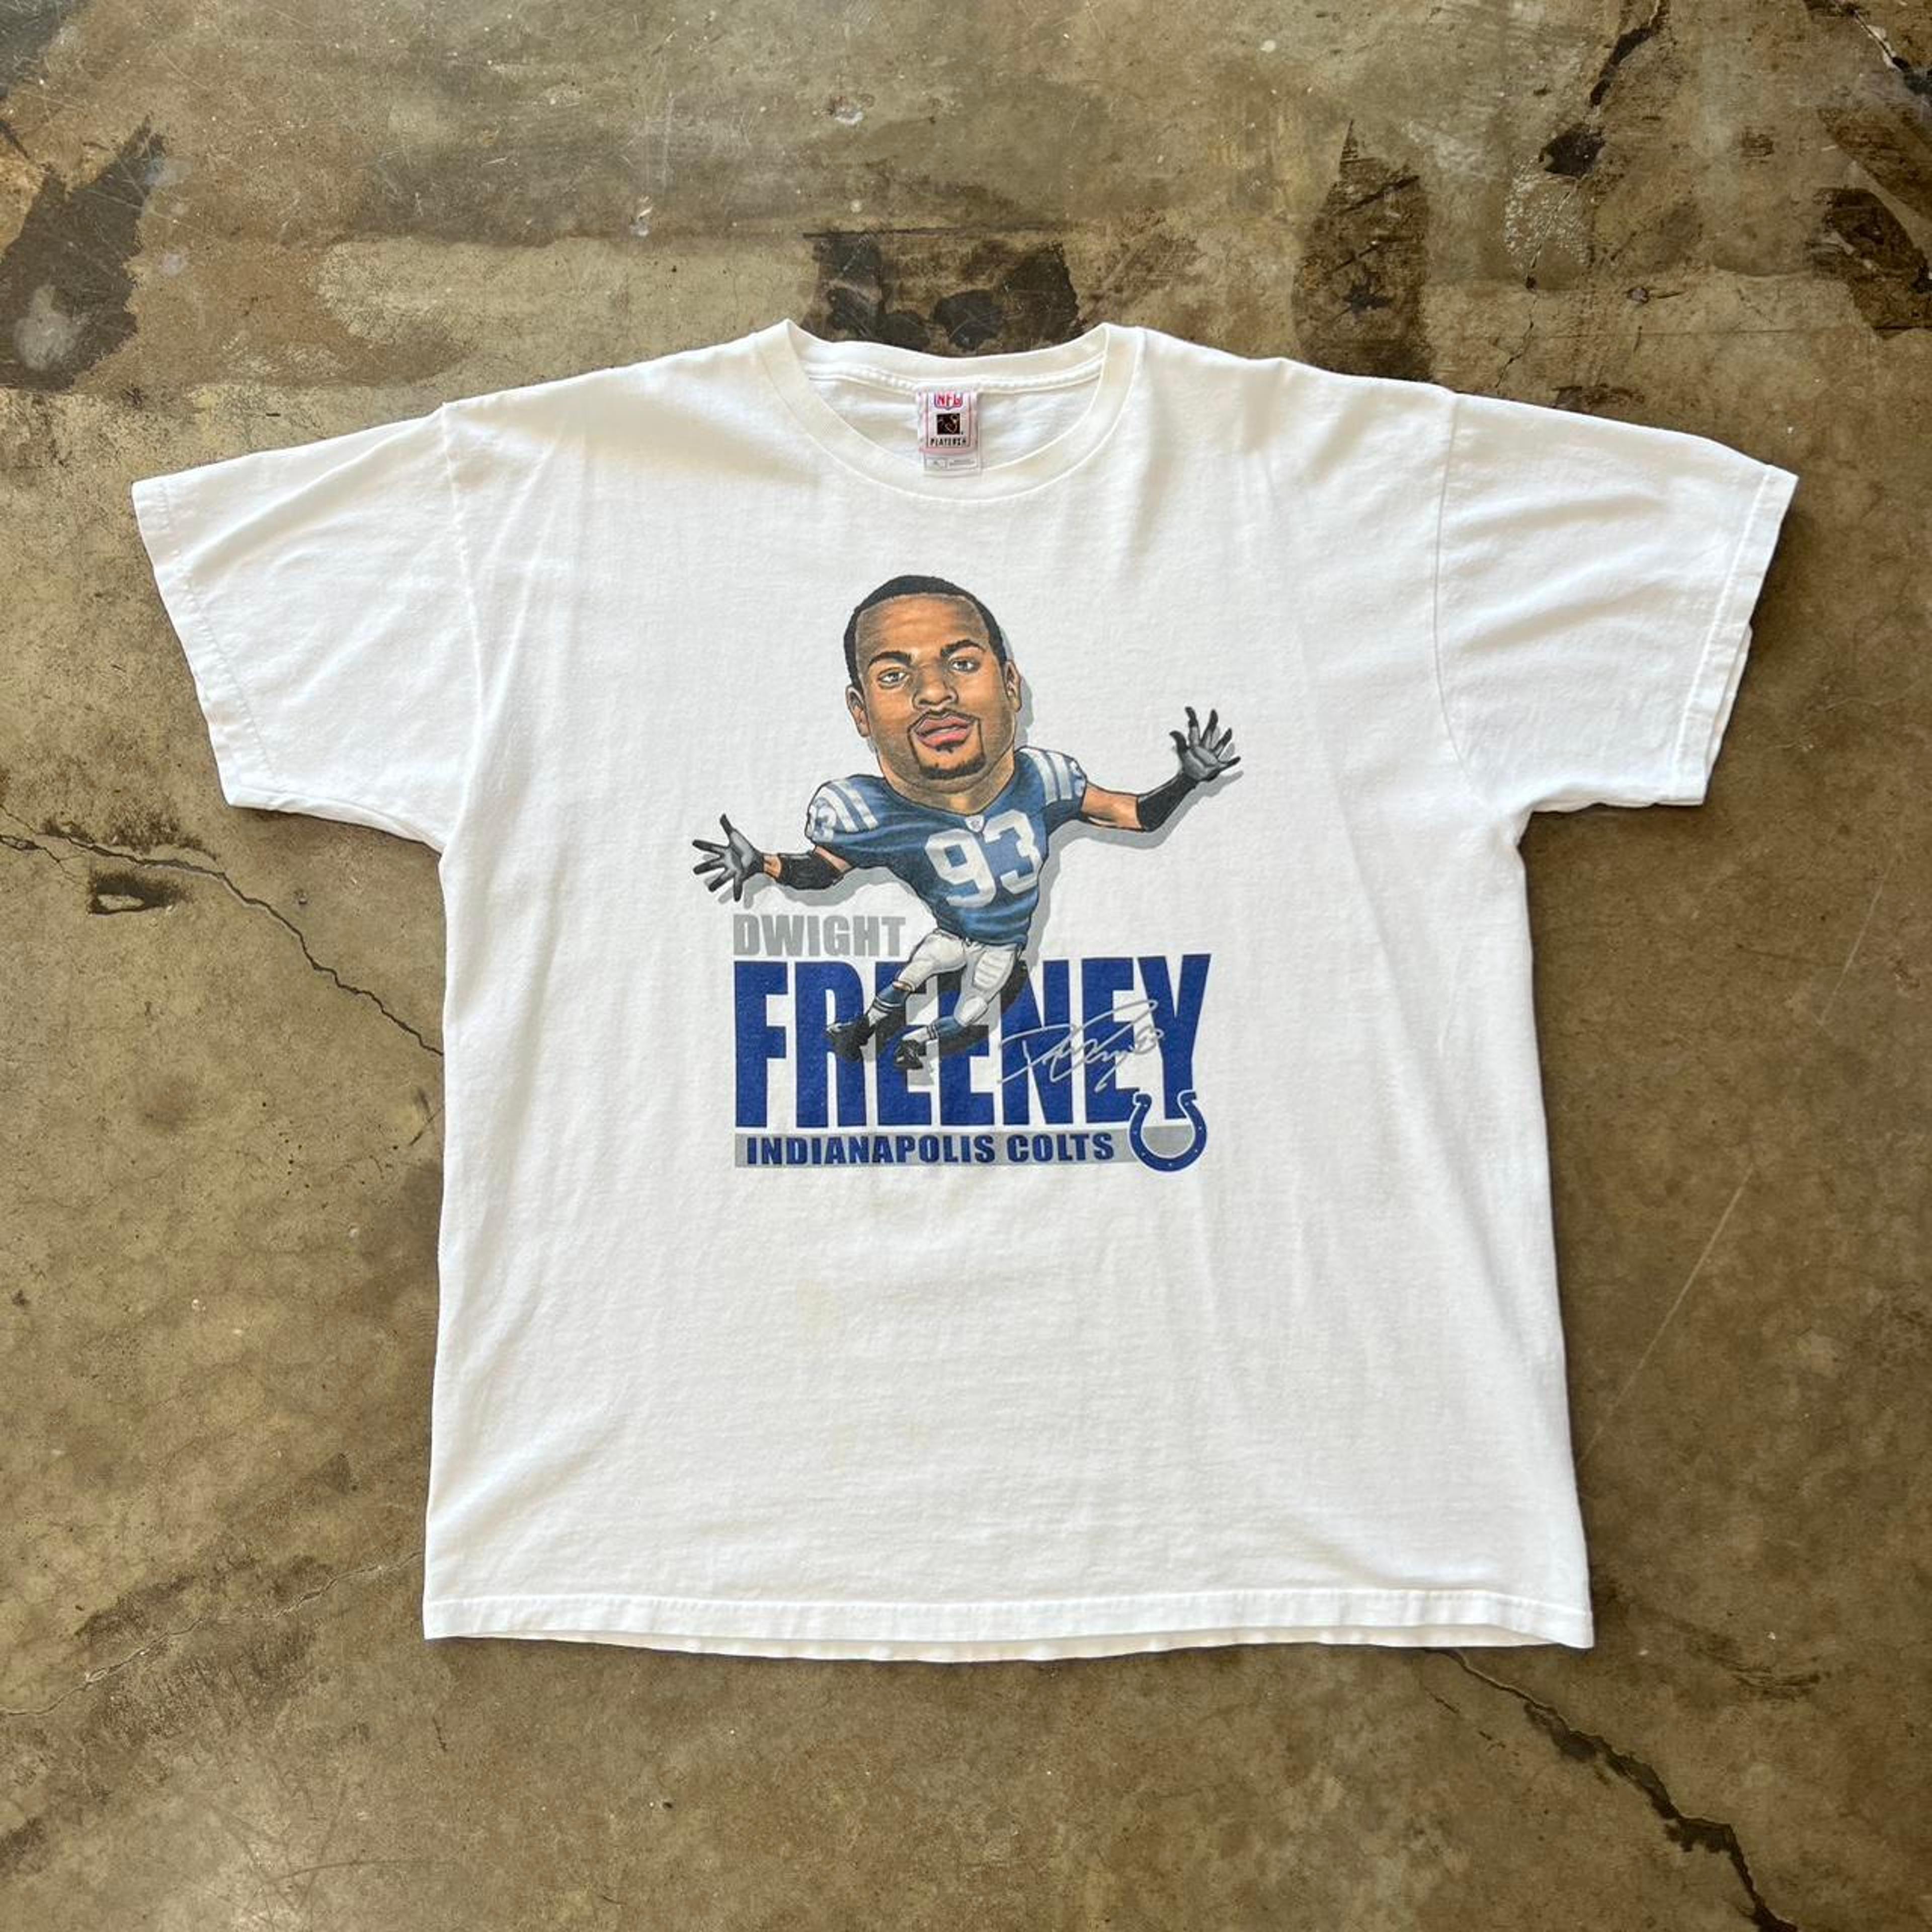 NFL Dwight Freeney Indianapolis Colts Tee